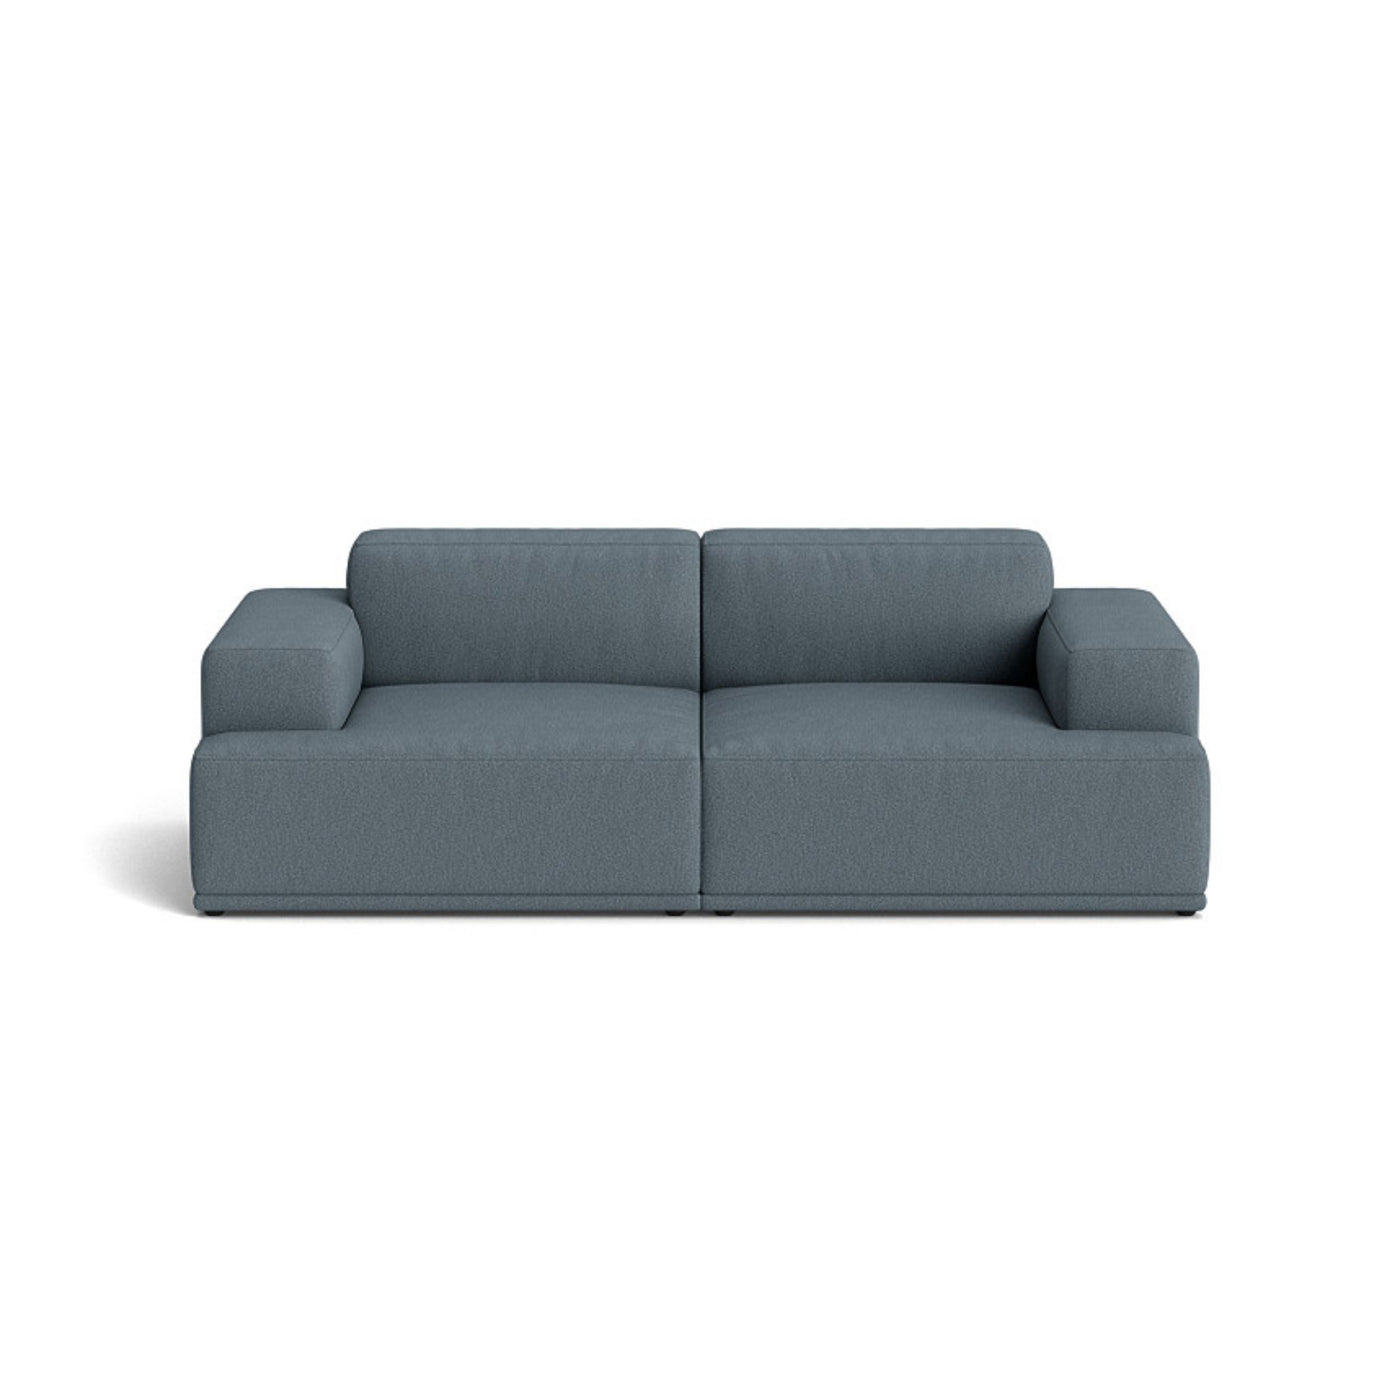 Muuto Connect Soft Modular 2 Seater Sofa, configuration 1. made-to-order from someday designs. #colour_clay-1-blue